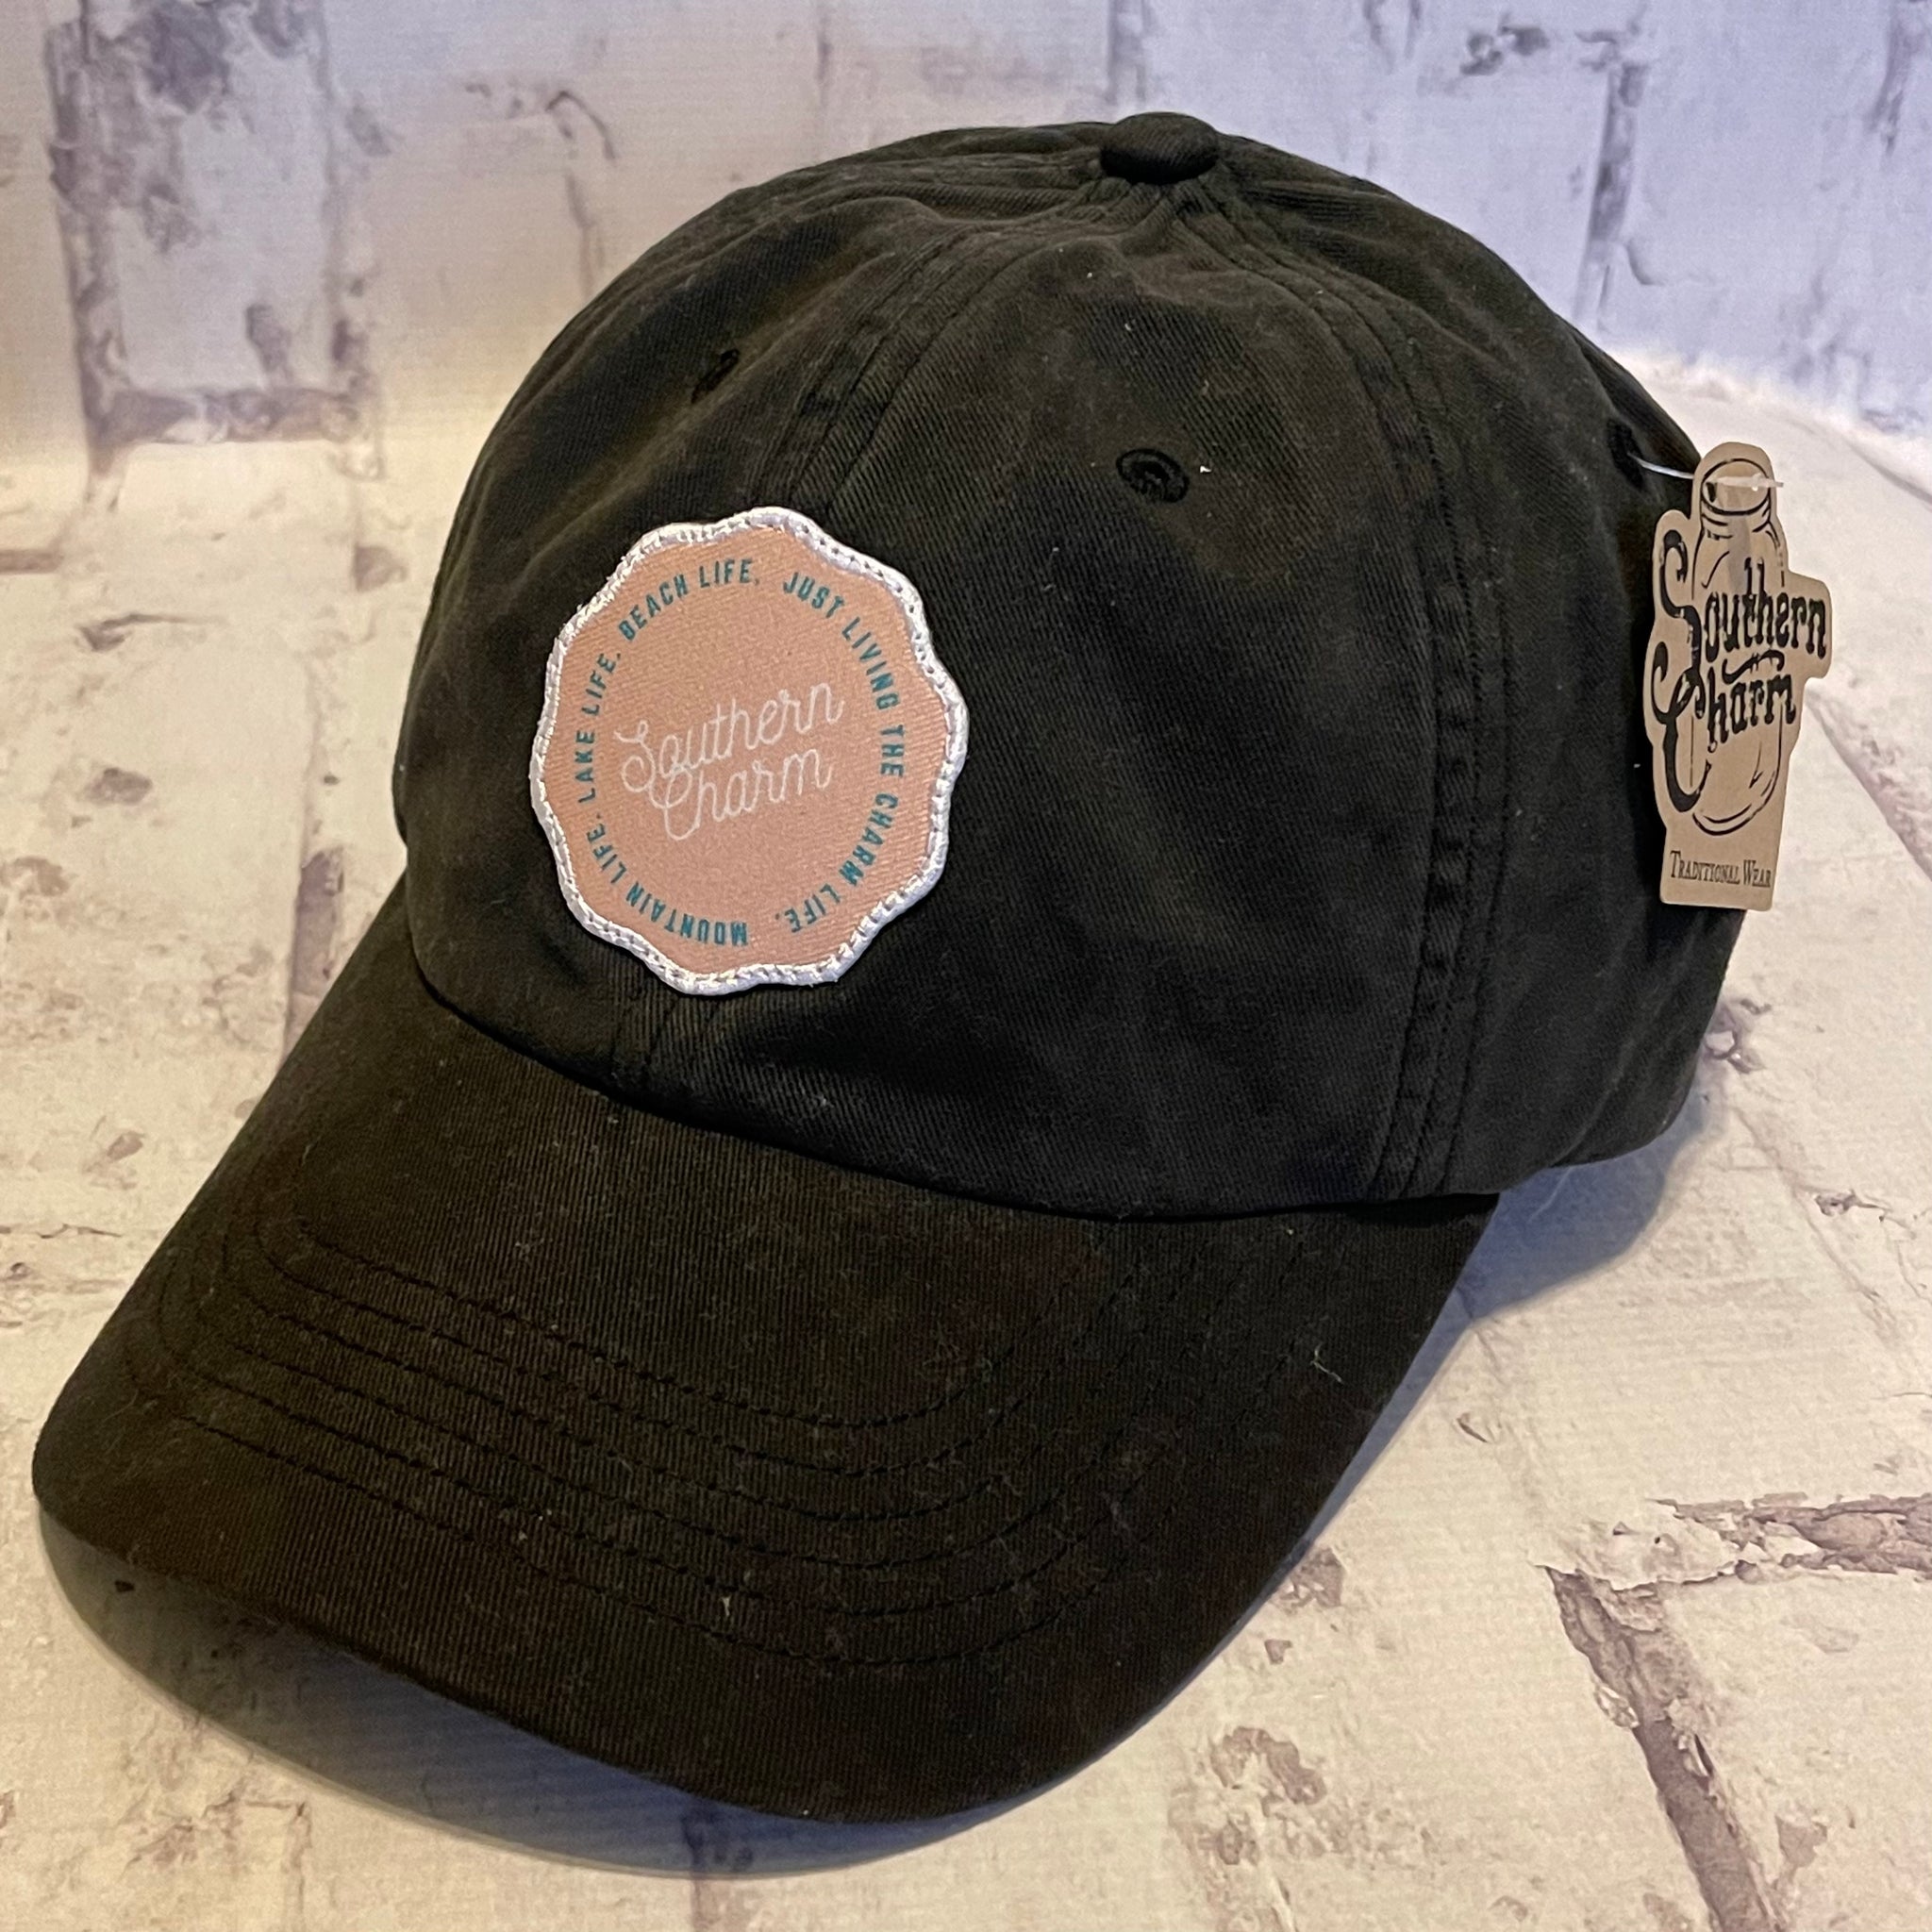 Southern Charm "Mtn Lake Beach" Hat - Black with Woven Patch - Southern Charm "Shop The Charm"